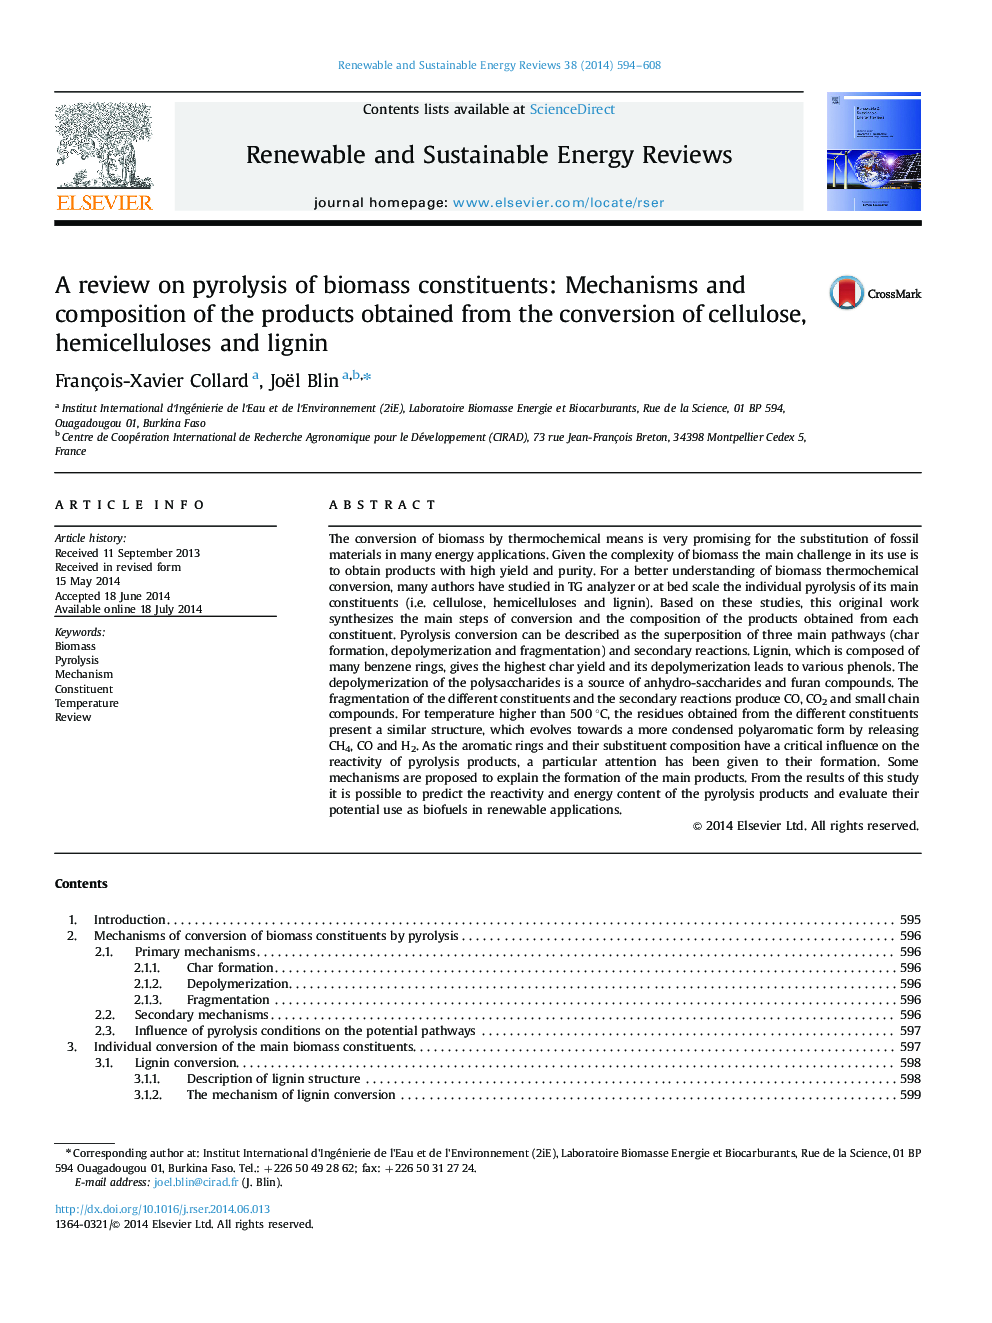 A review on pyrolysis of biomass constituents: Mechanisms and composition of the products obtained from the conversion of cellulose, hemicelluloses and lignin